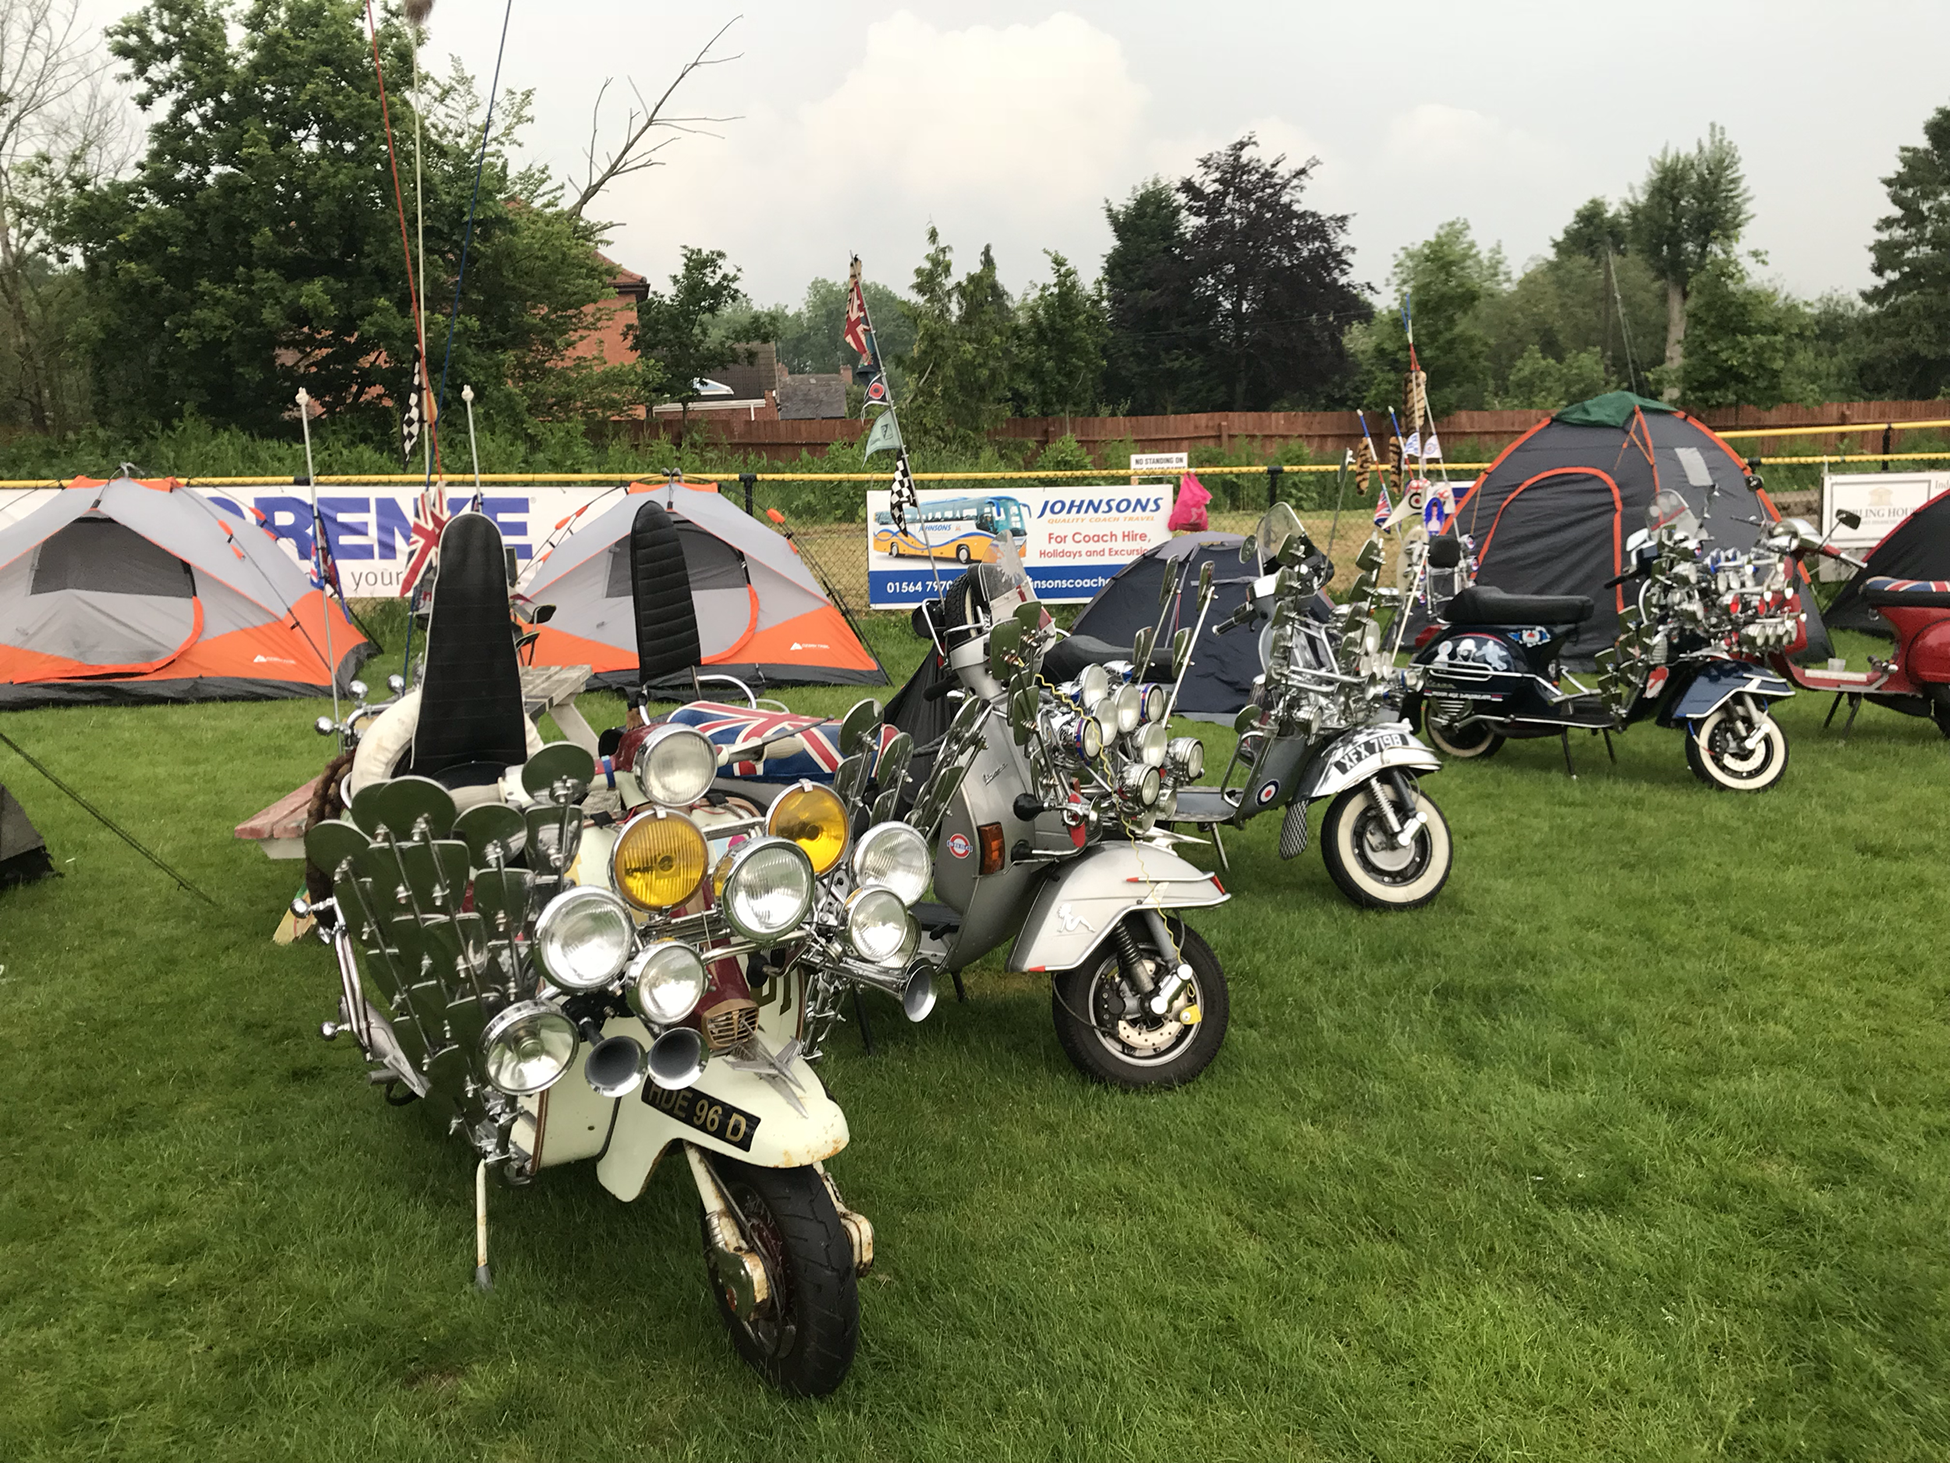 A photograph shows customized Vespa scooters parked on a grassy field with tents in the background.